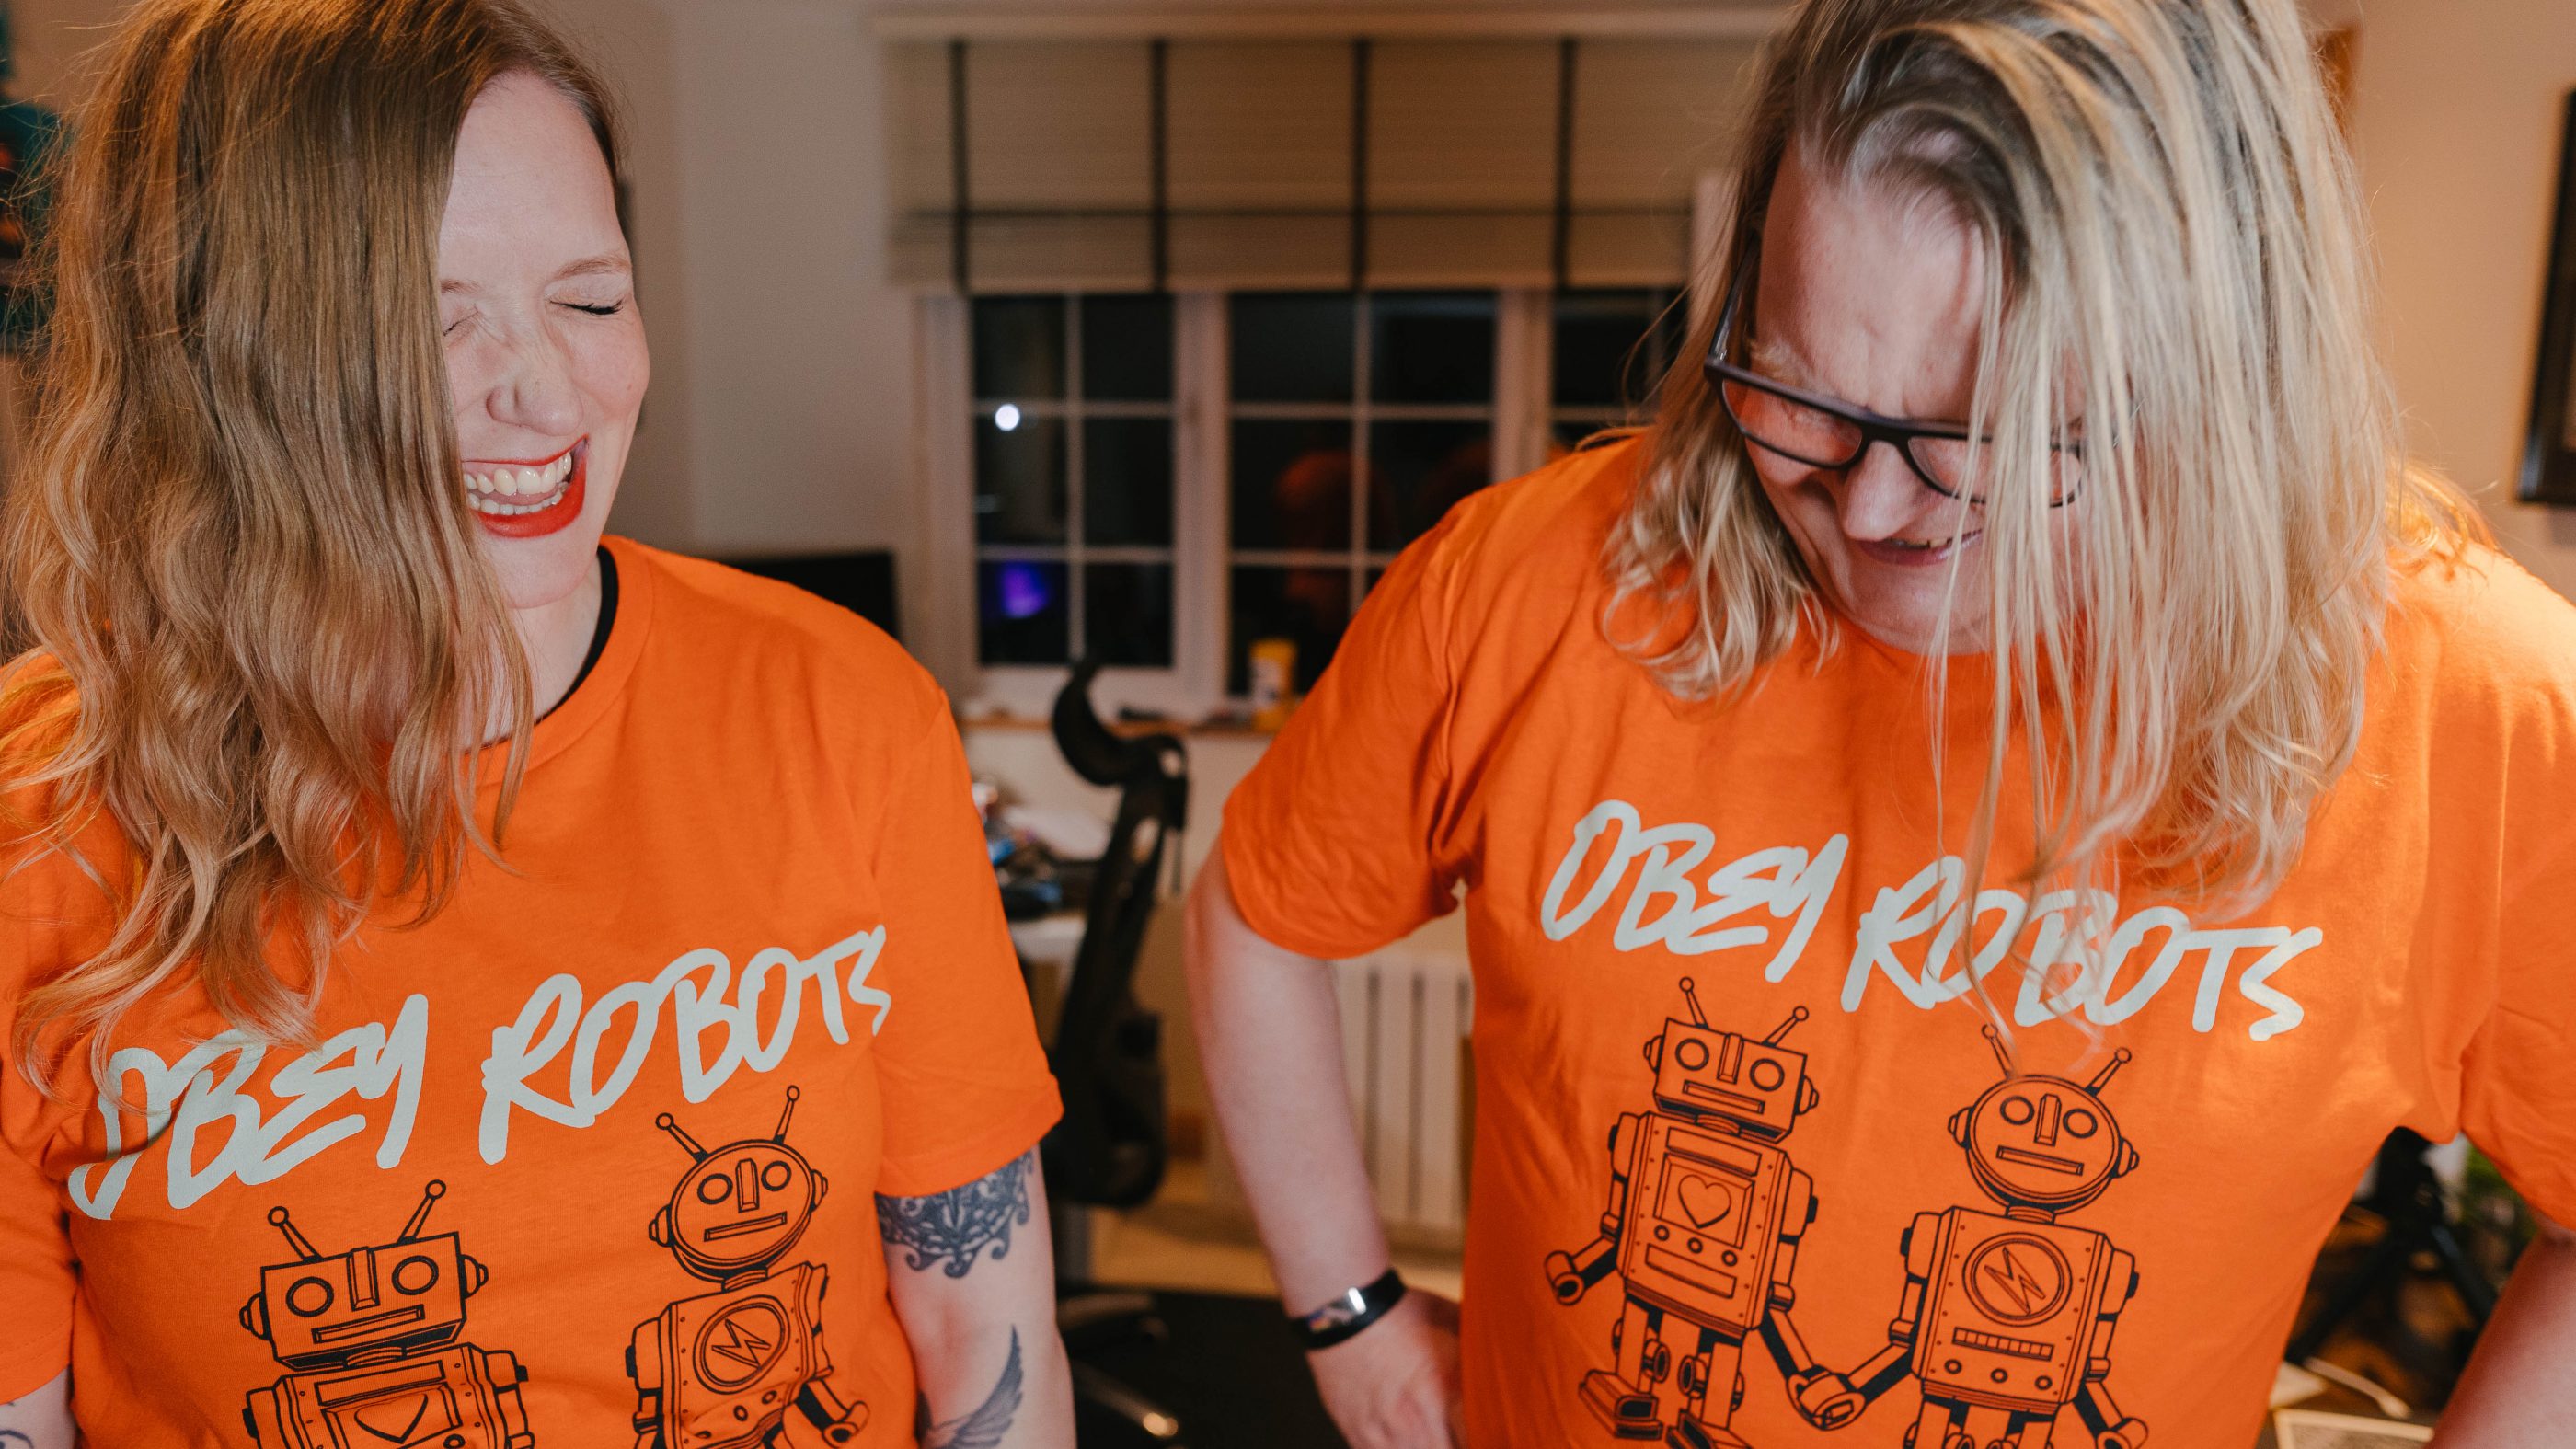 Look what we made! Obey Robots unboxing video + Top 20 WTF?